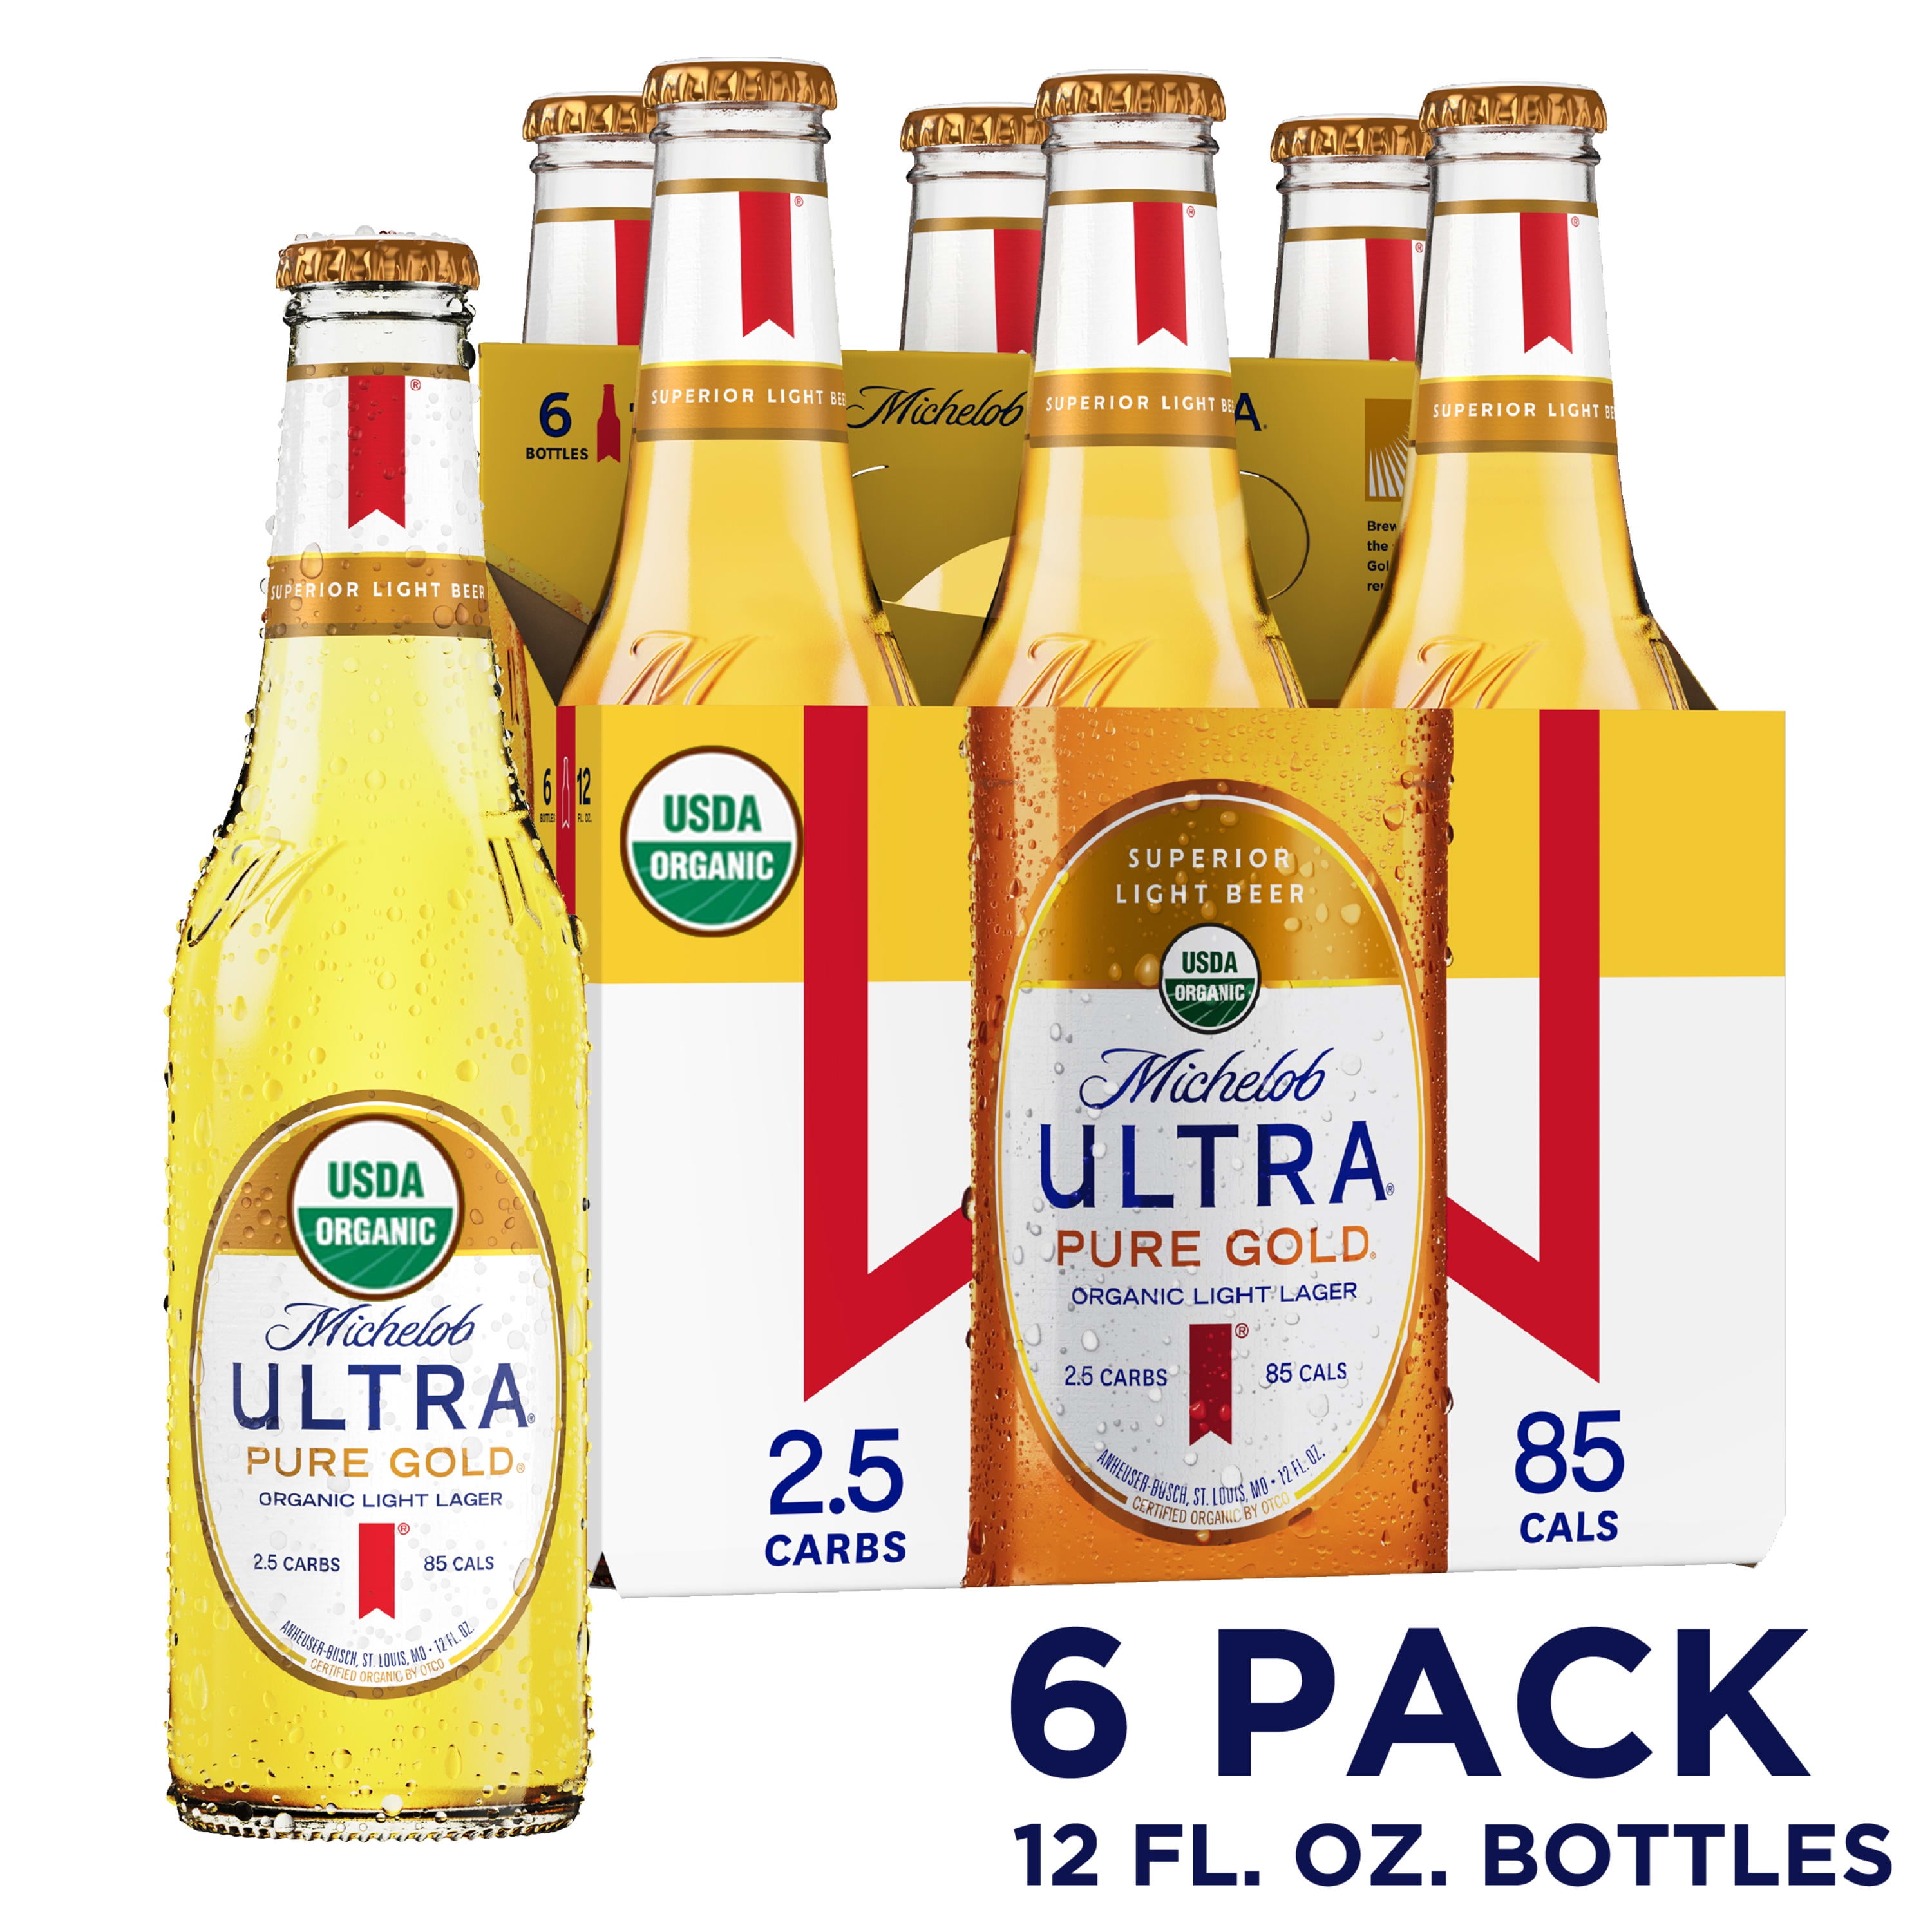 michelob-ultra-pure-gold-organic-light-lager-beer-6-pack-12-fl-oz